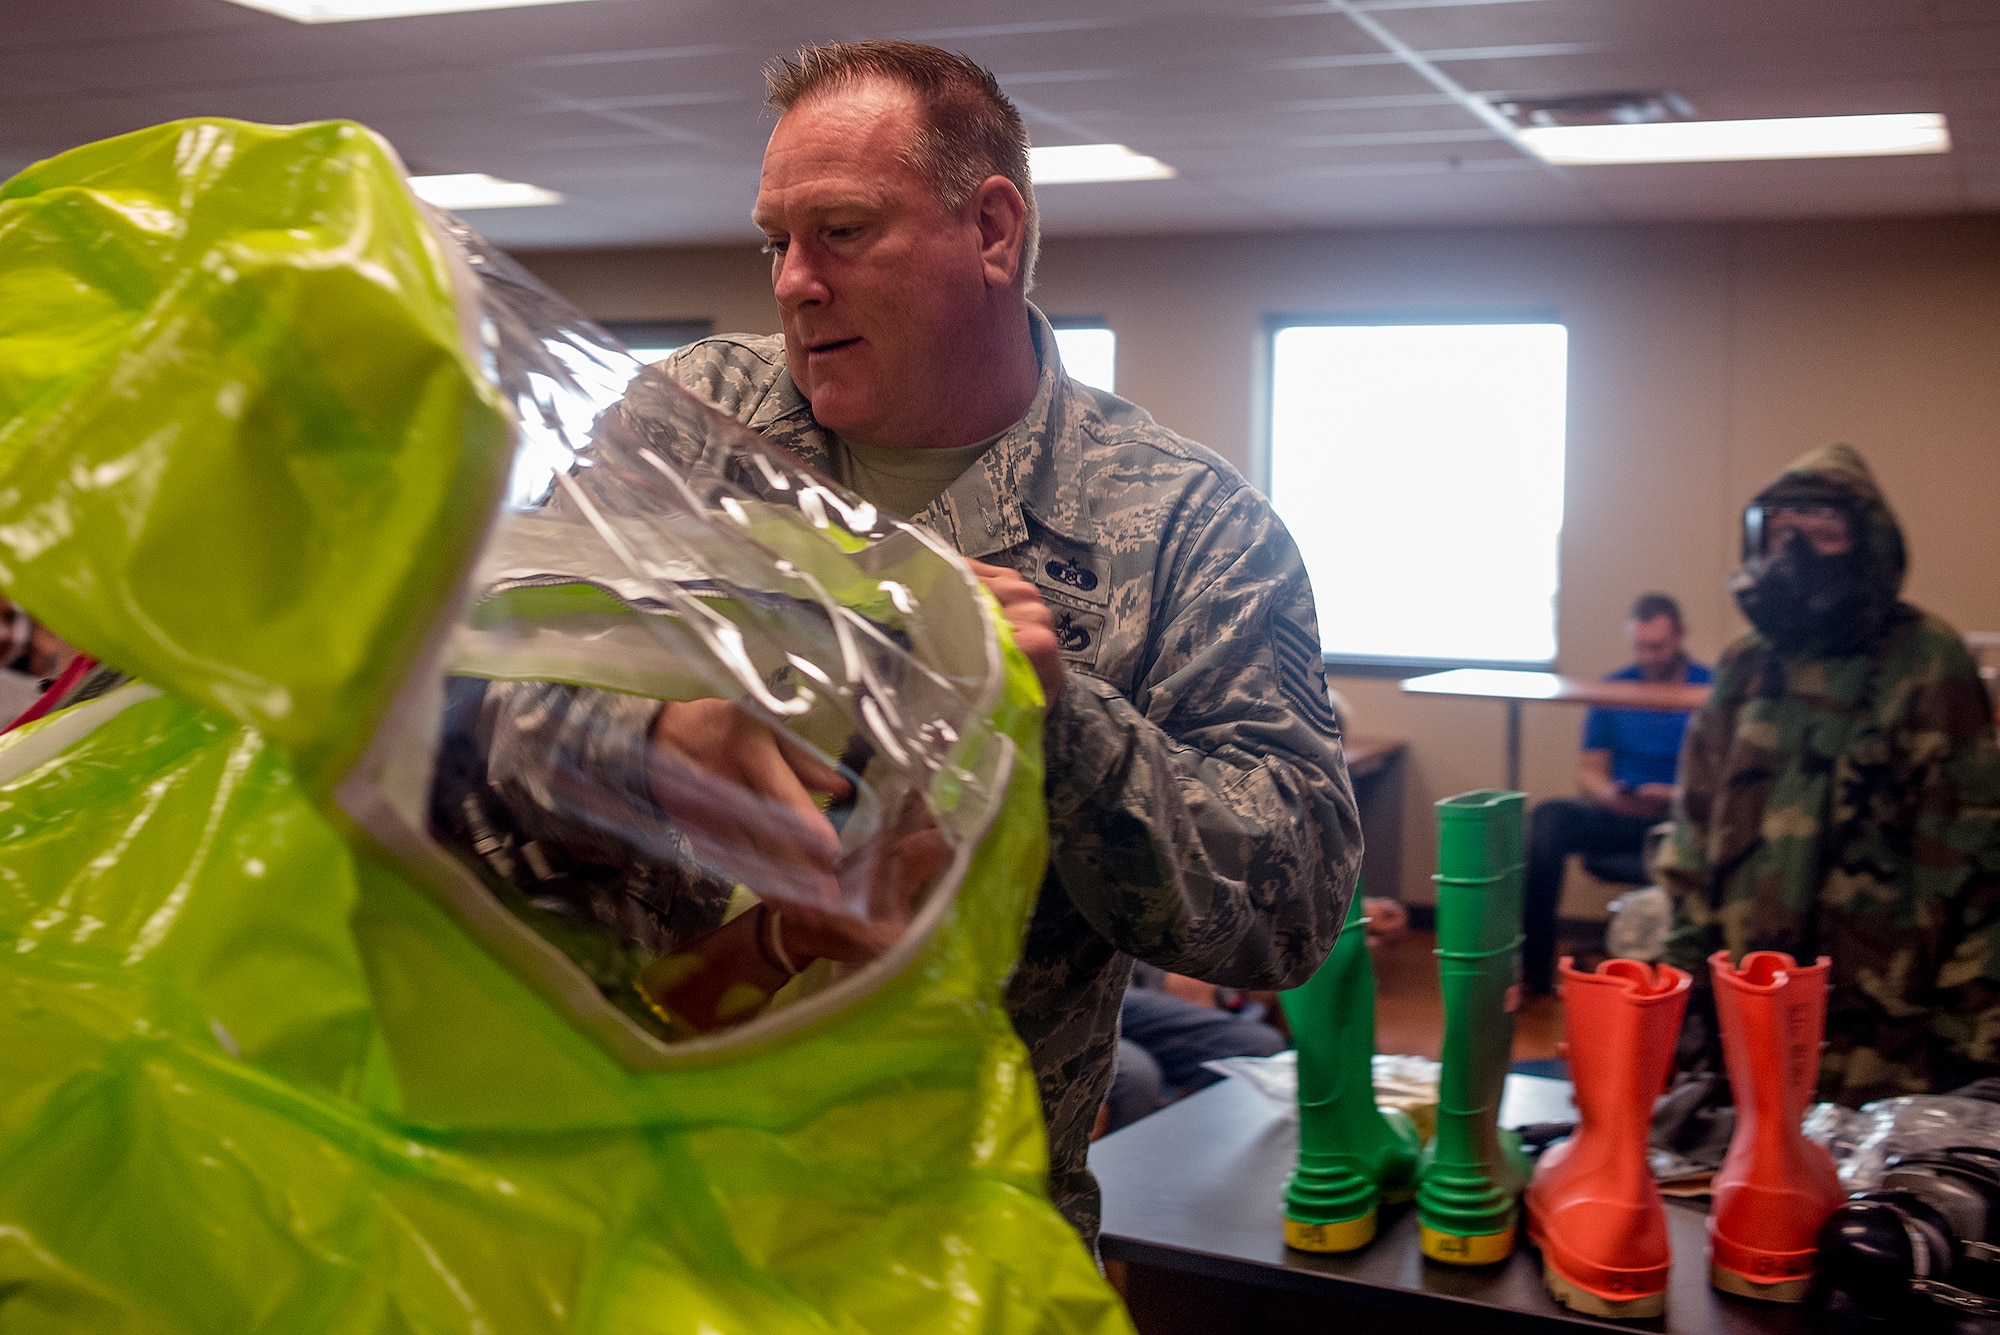 Tech Sgt. Tim Cotterall, 137th Civil Engineering Squadron emergency management specialist demonstrates hazardous materials safety equipment at Deer Creek Middle School, Edmond, Okla. on September 8, 2015. Tech Sgt. Cotterall spends time every September educating the students on the  hazardous materials in the home that can cause serious injury. (U.S. Air National Guard photo by Master Sgt. Andrew LaMoreaux/Released)